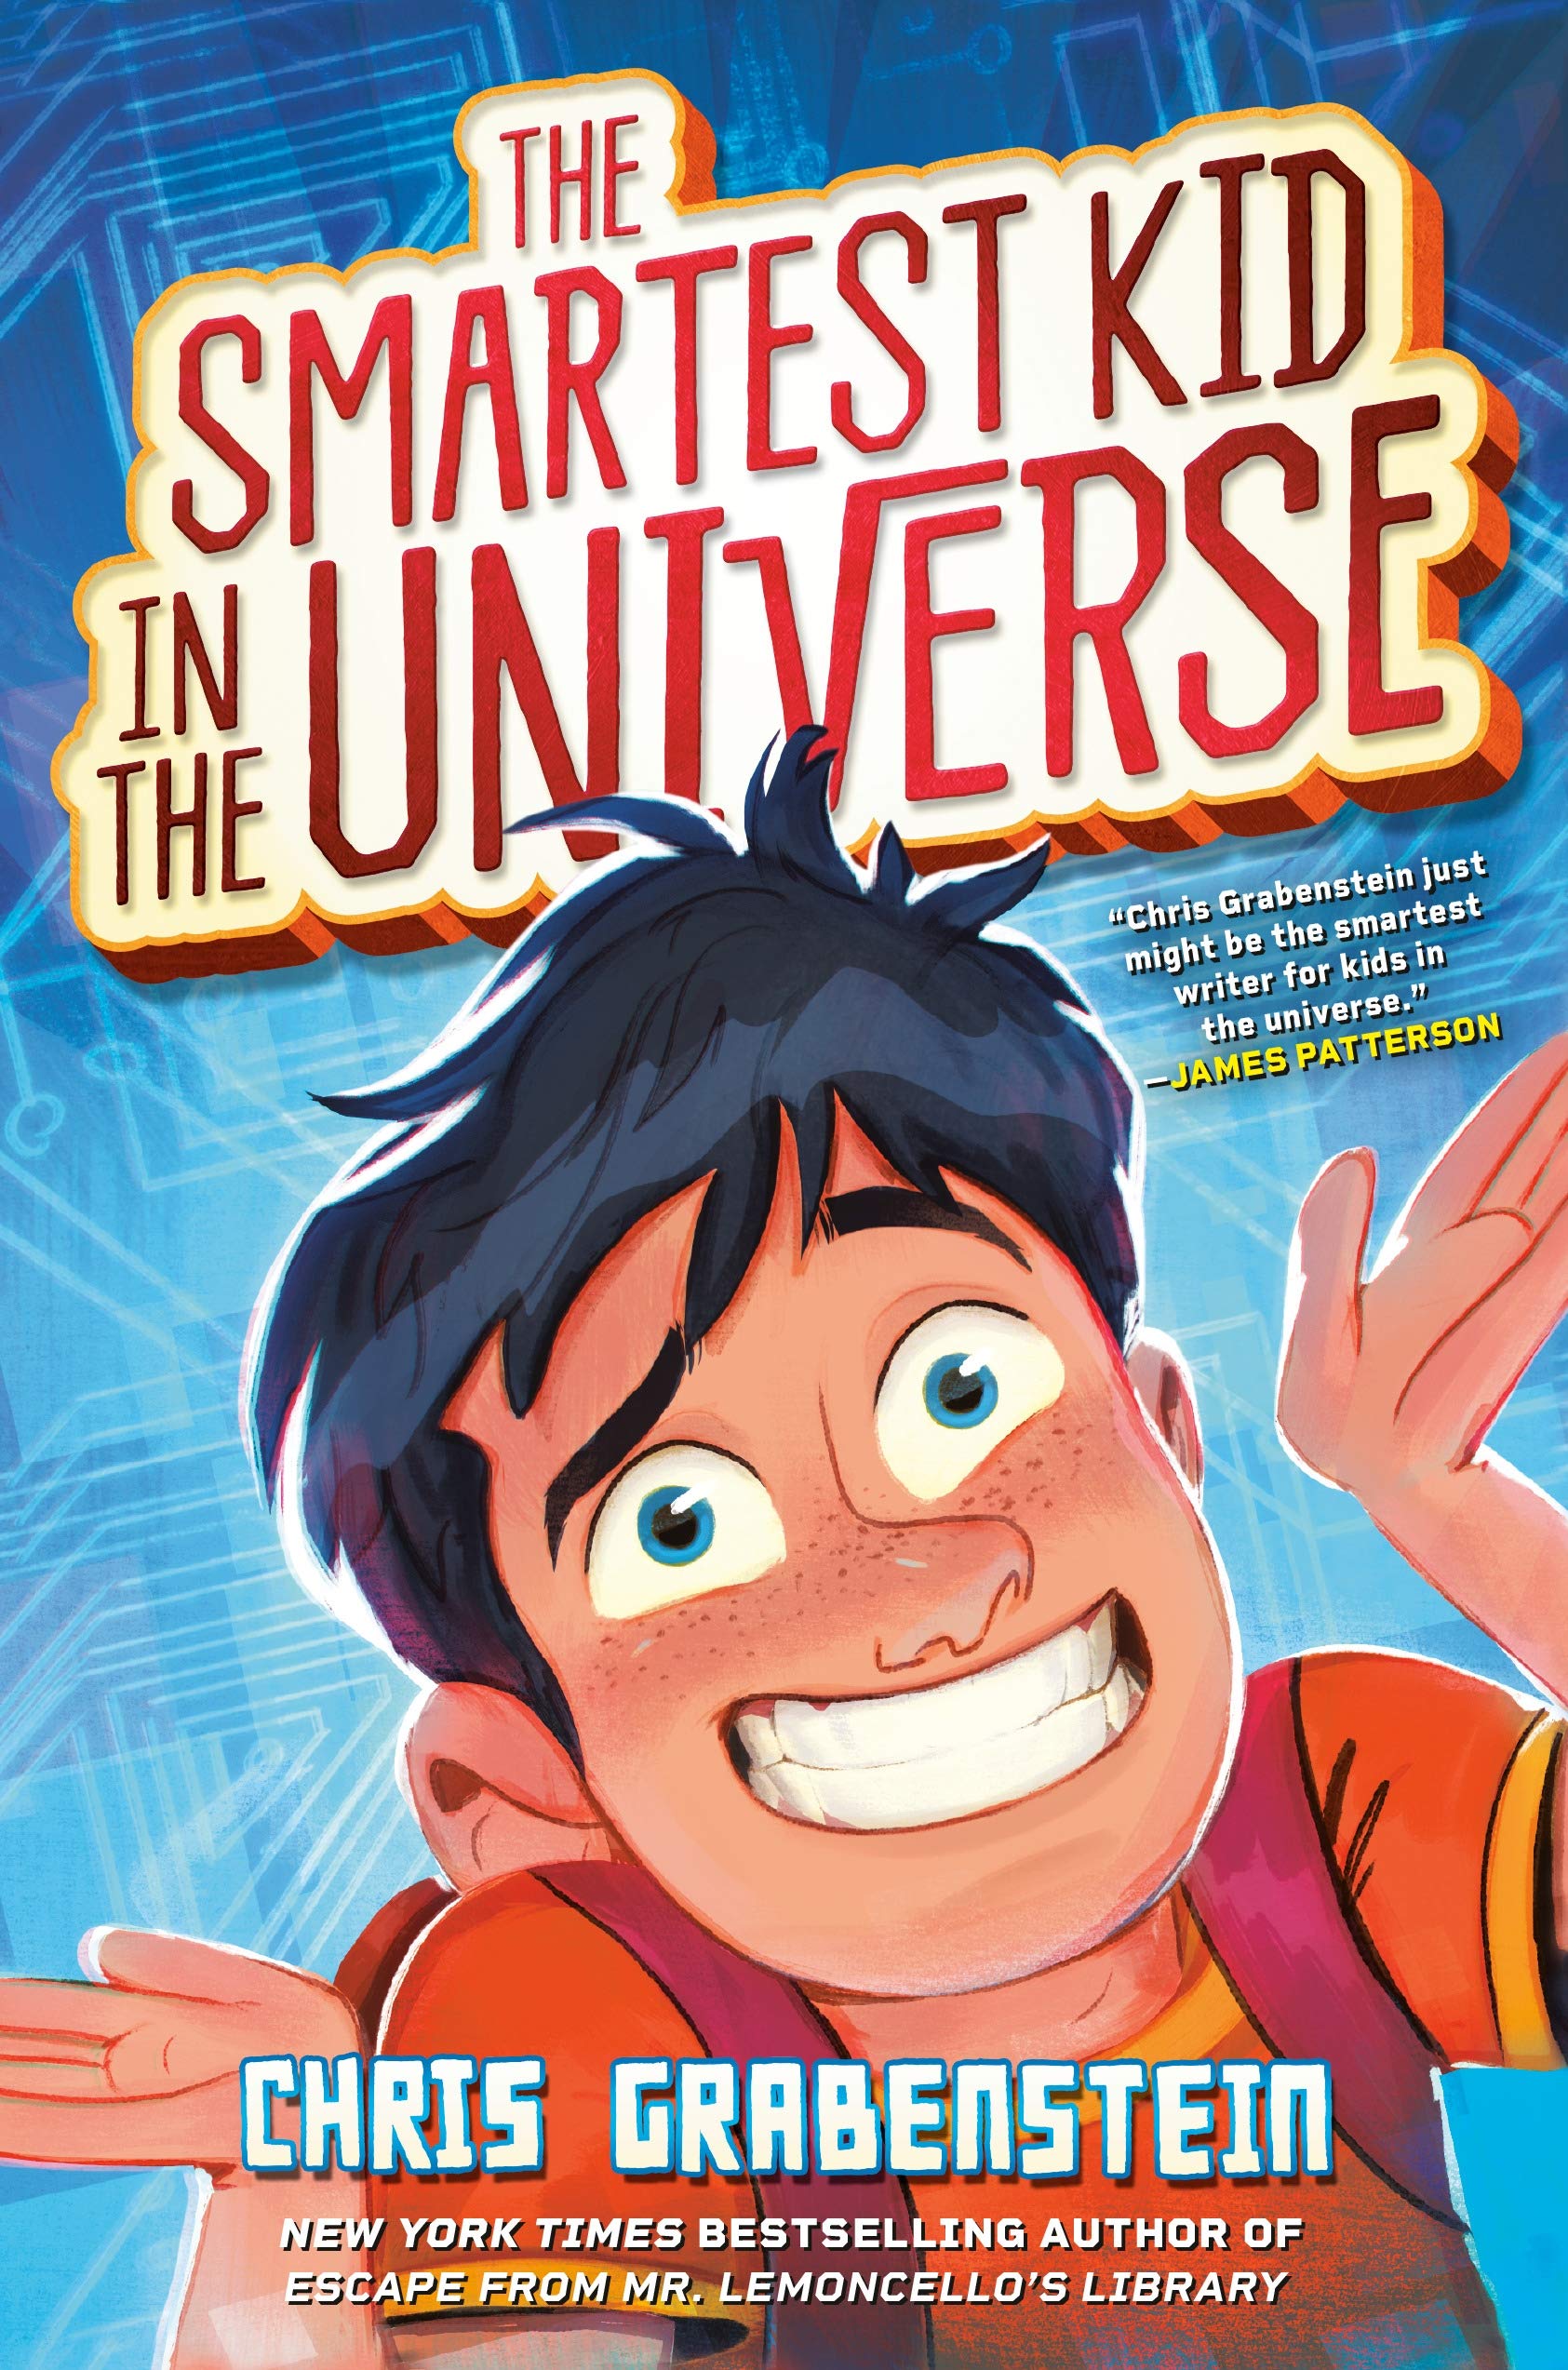 Read more about the article The Smartest Kid in the Universe (Smartest Kid in the Universe #1) by Chris Grabenstein